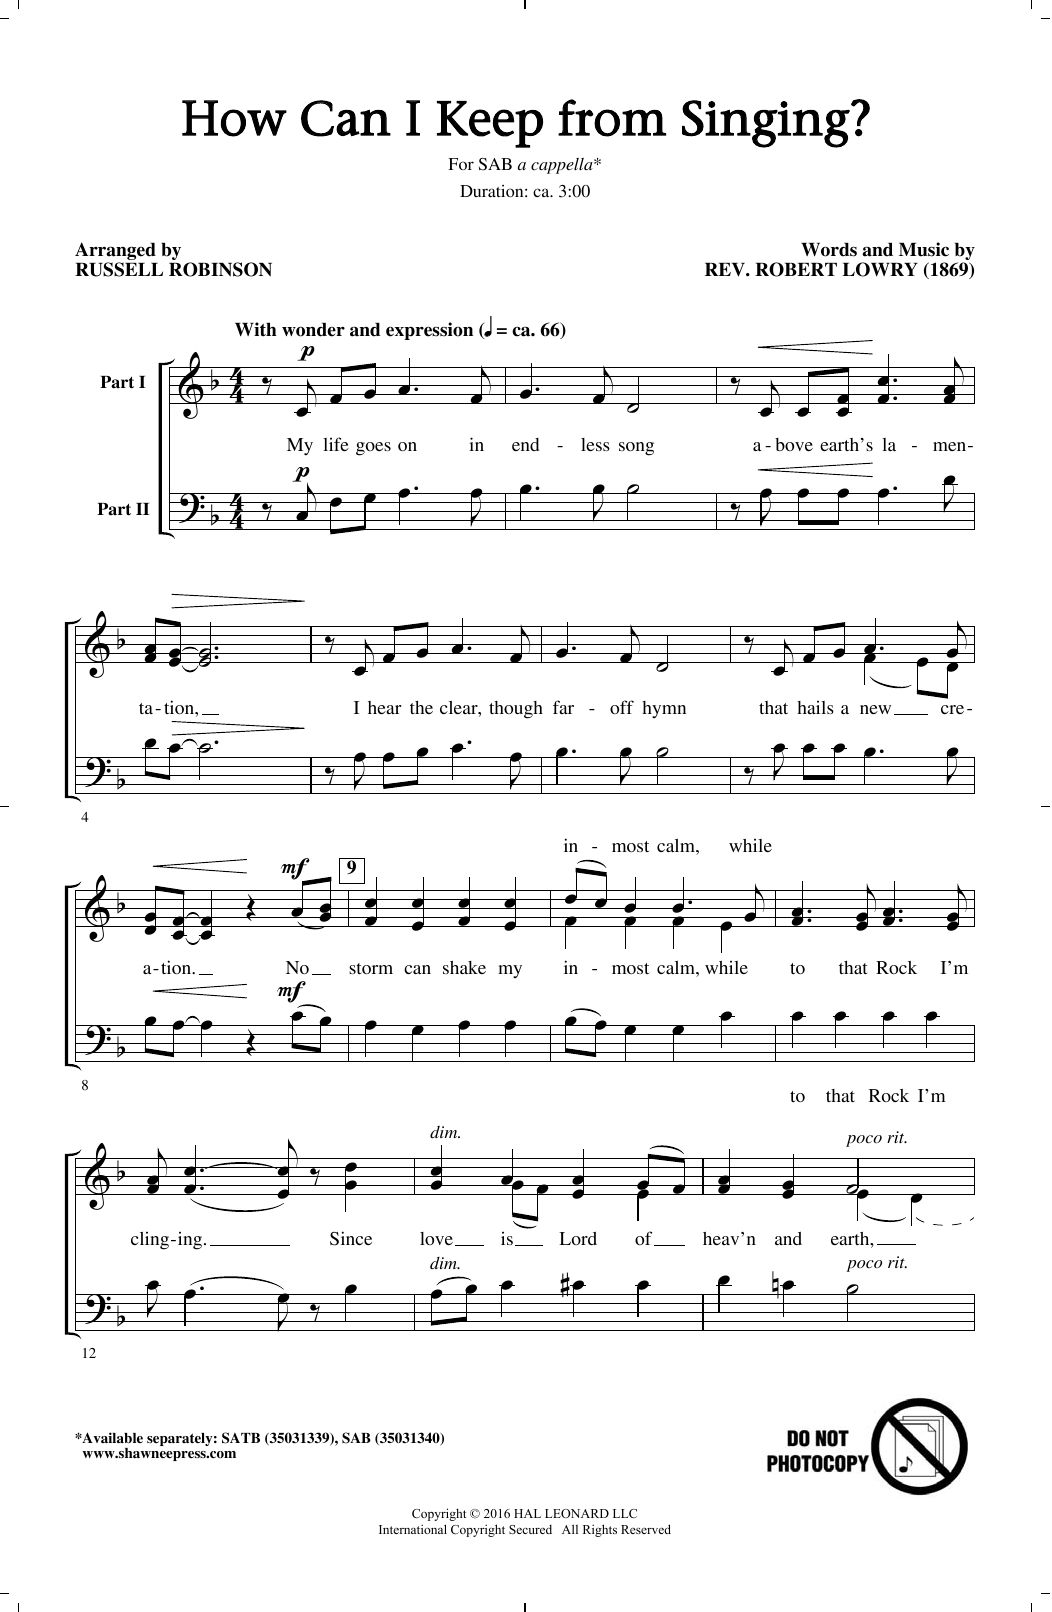 Download Russell Robinson How Can I Keep From Singing? Sheet Music